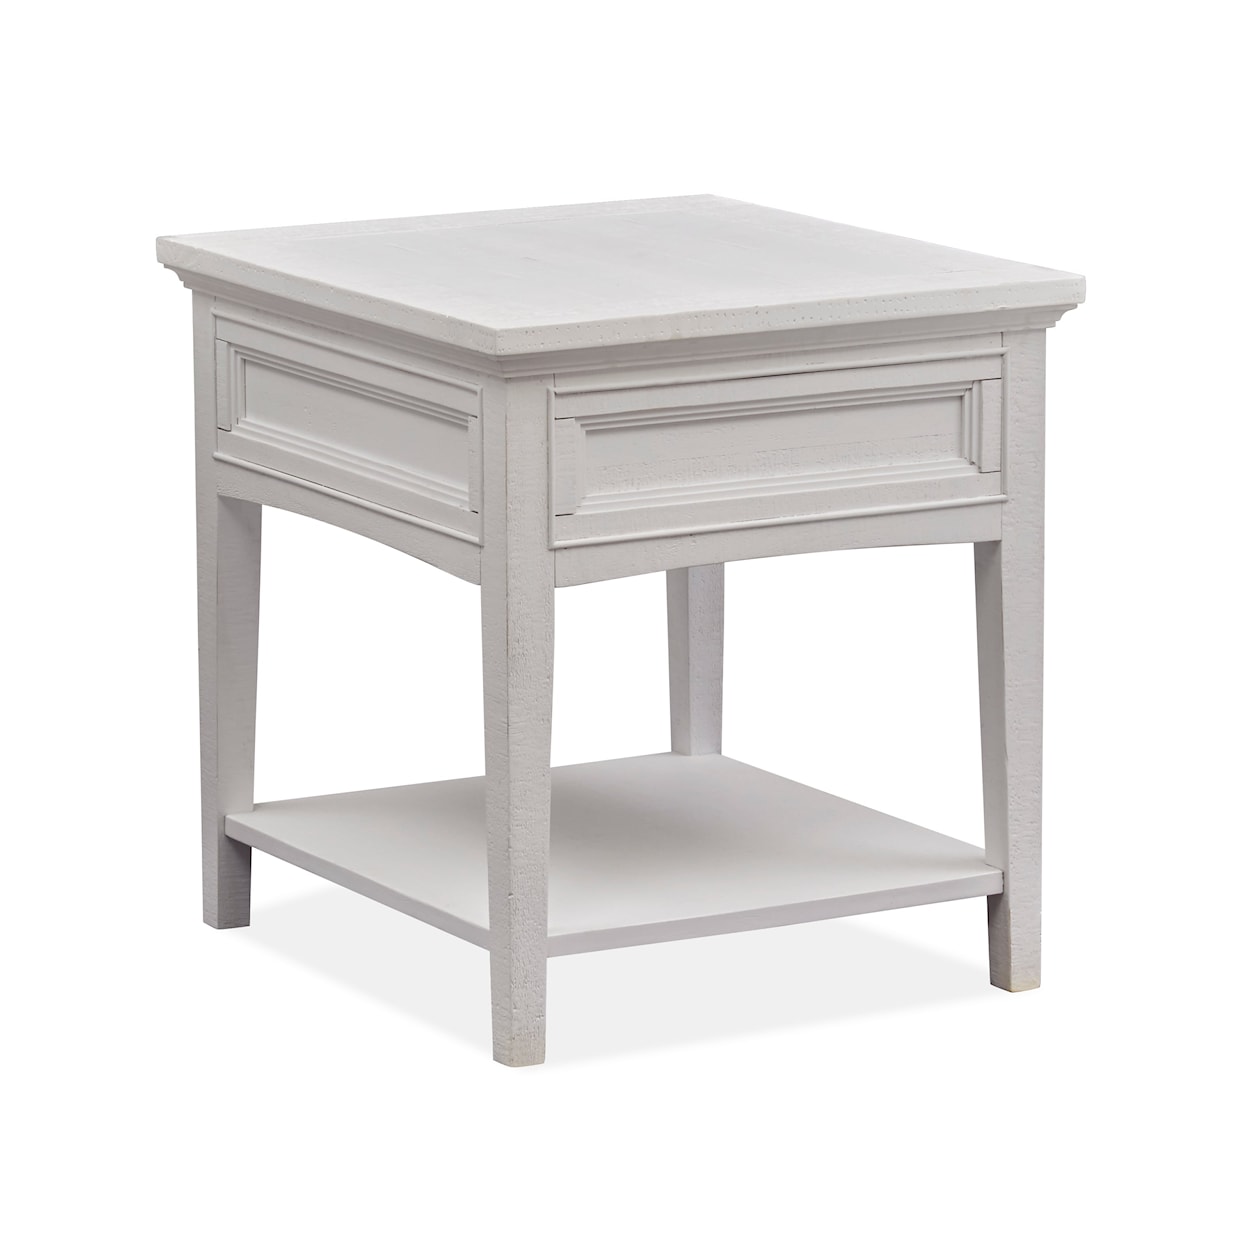 Magnussen Home Heron Cove Occasional Tables Rectangular End Table